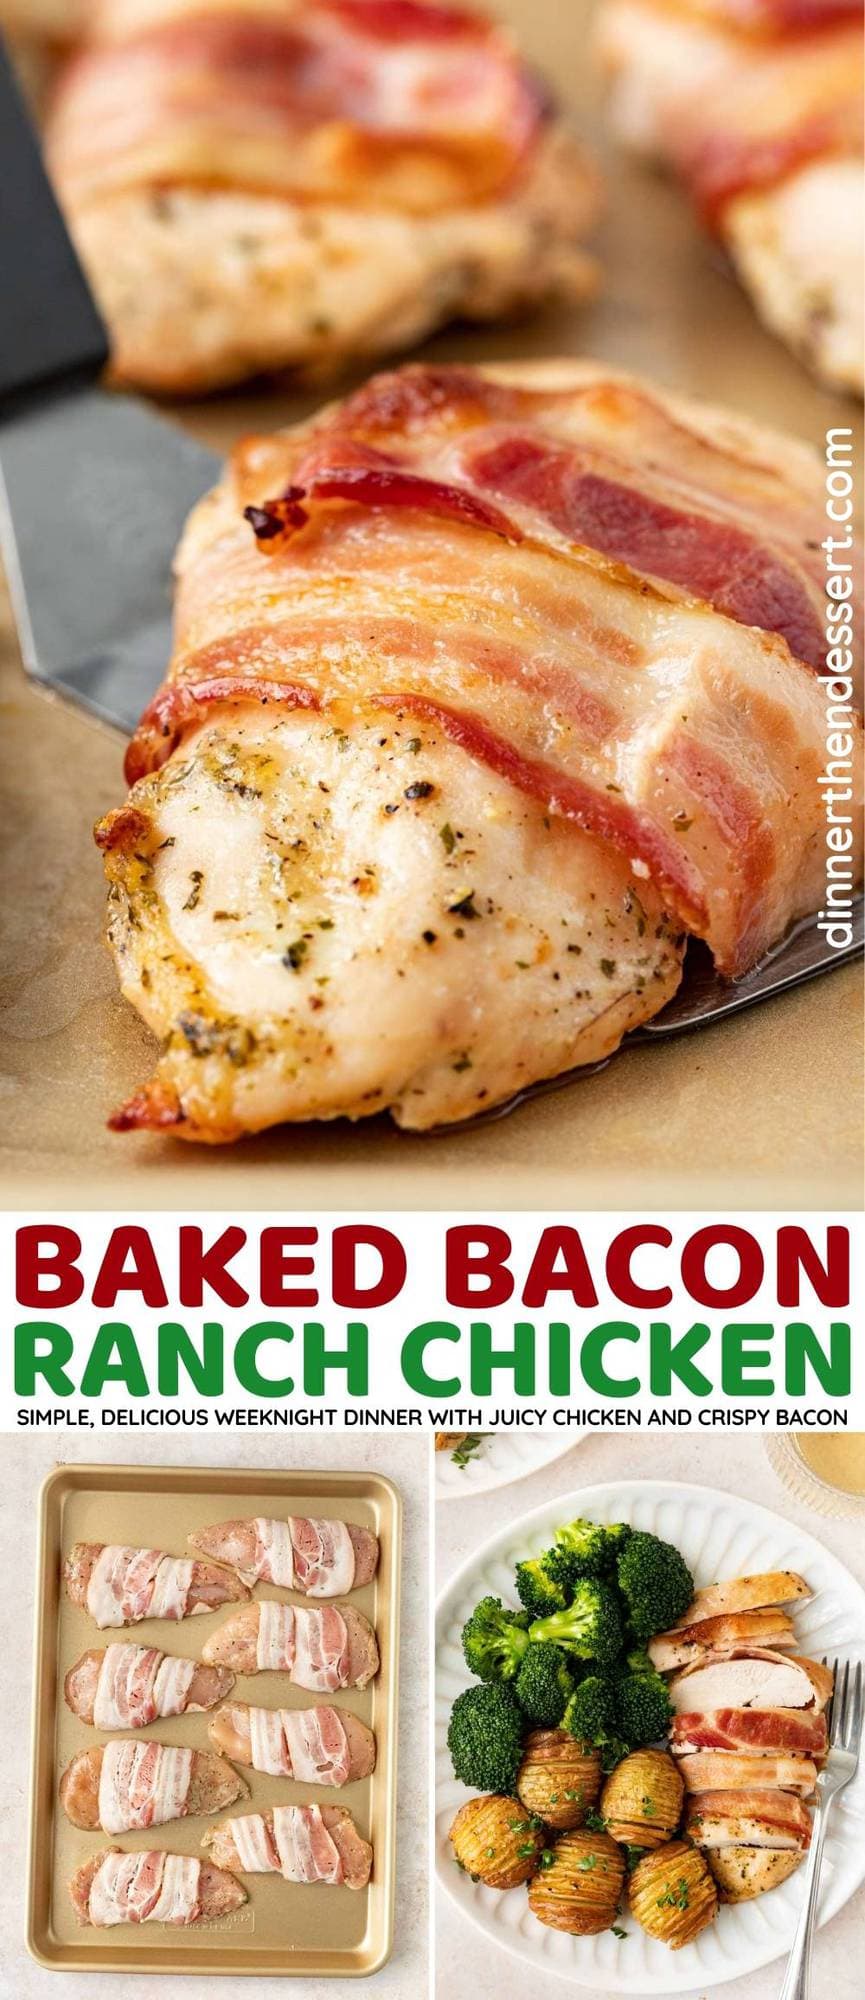 Baked Bacon Ranch Chicken collage